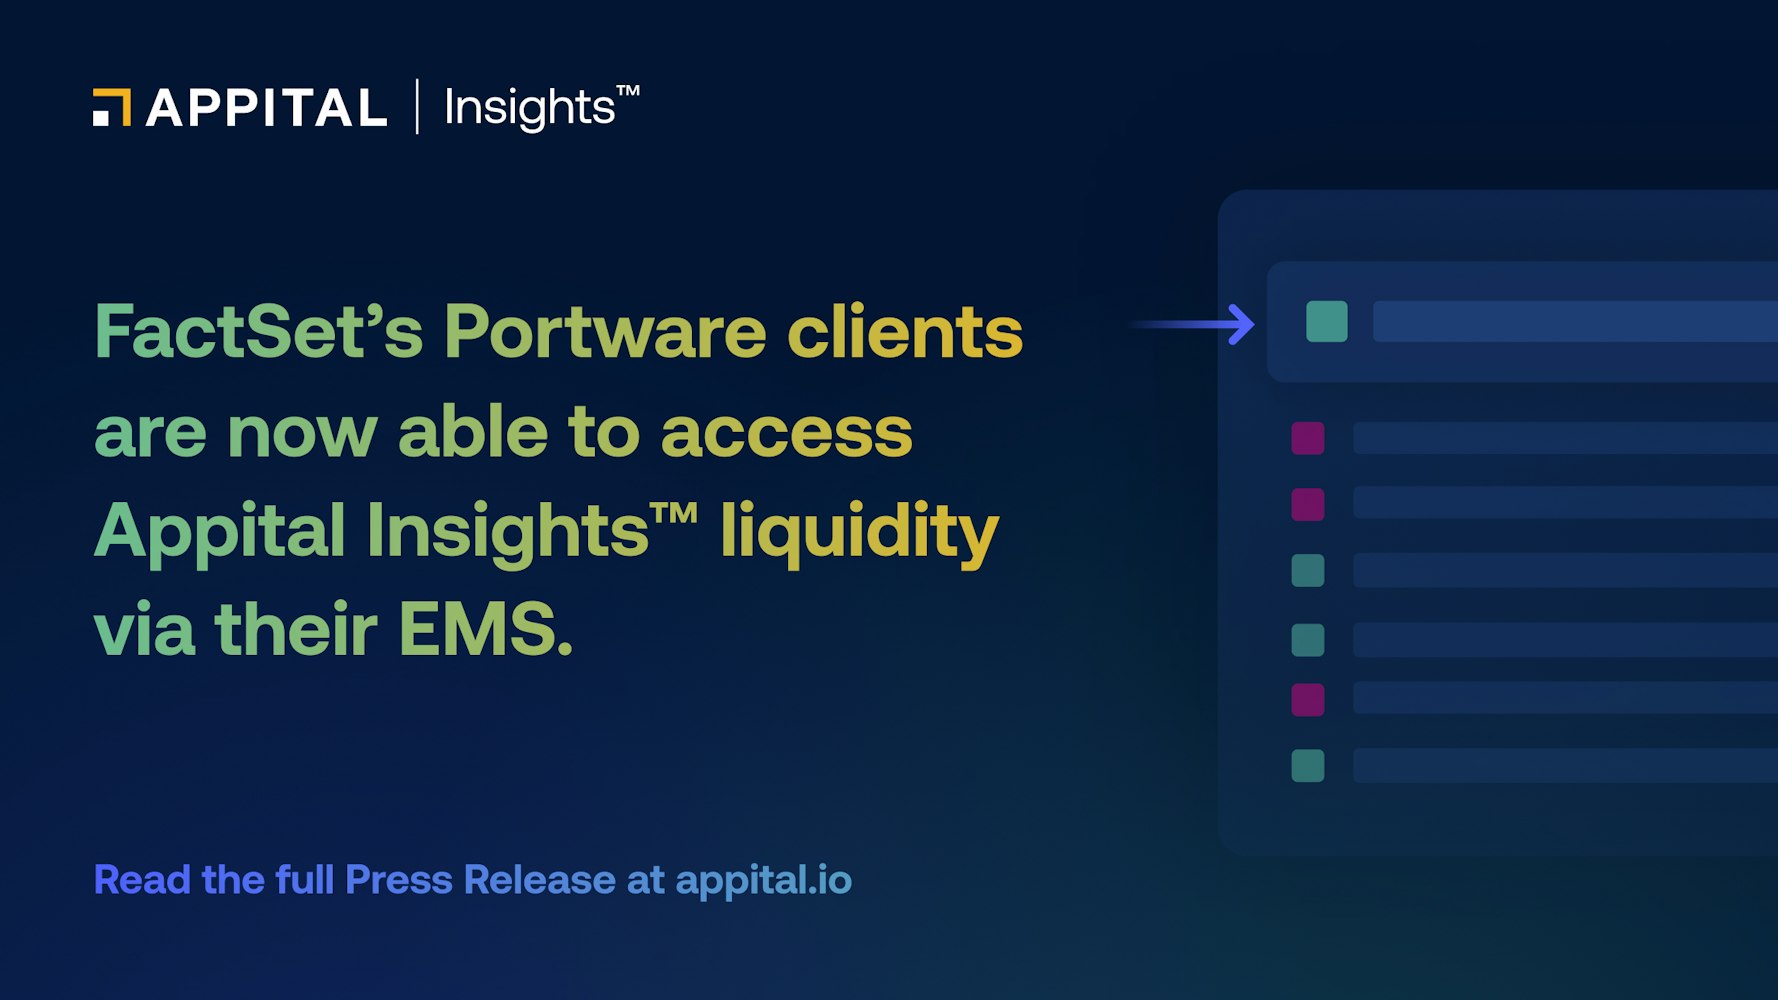 Appital Insights™ now fully integrated with FactSet’s Portware EMS